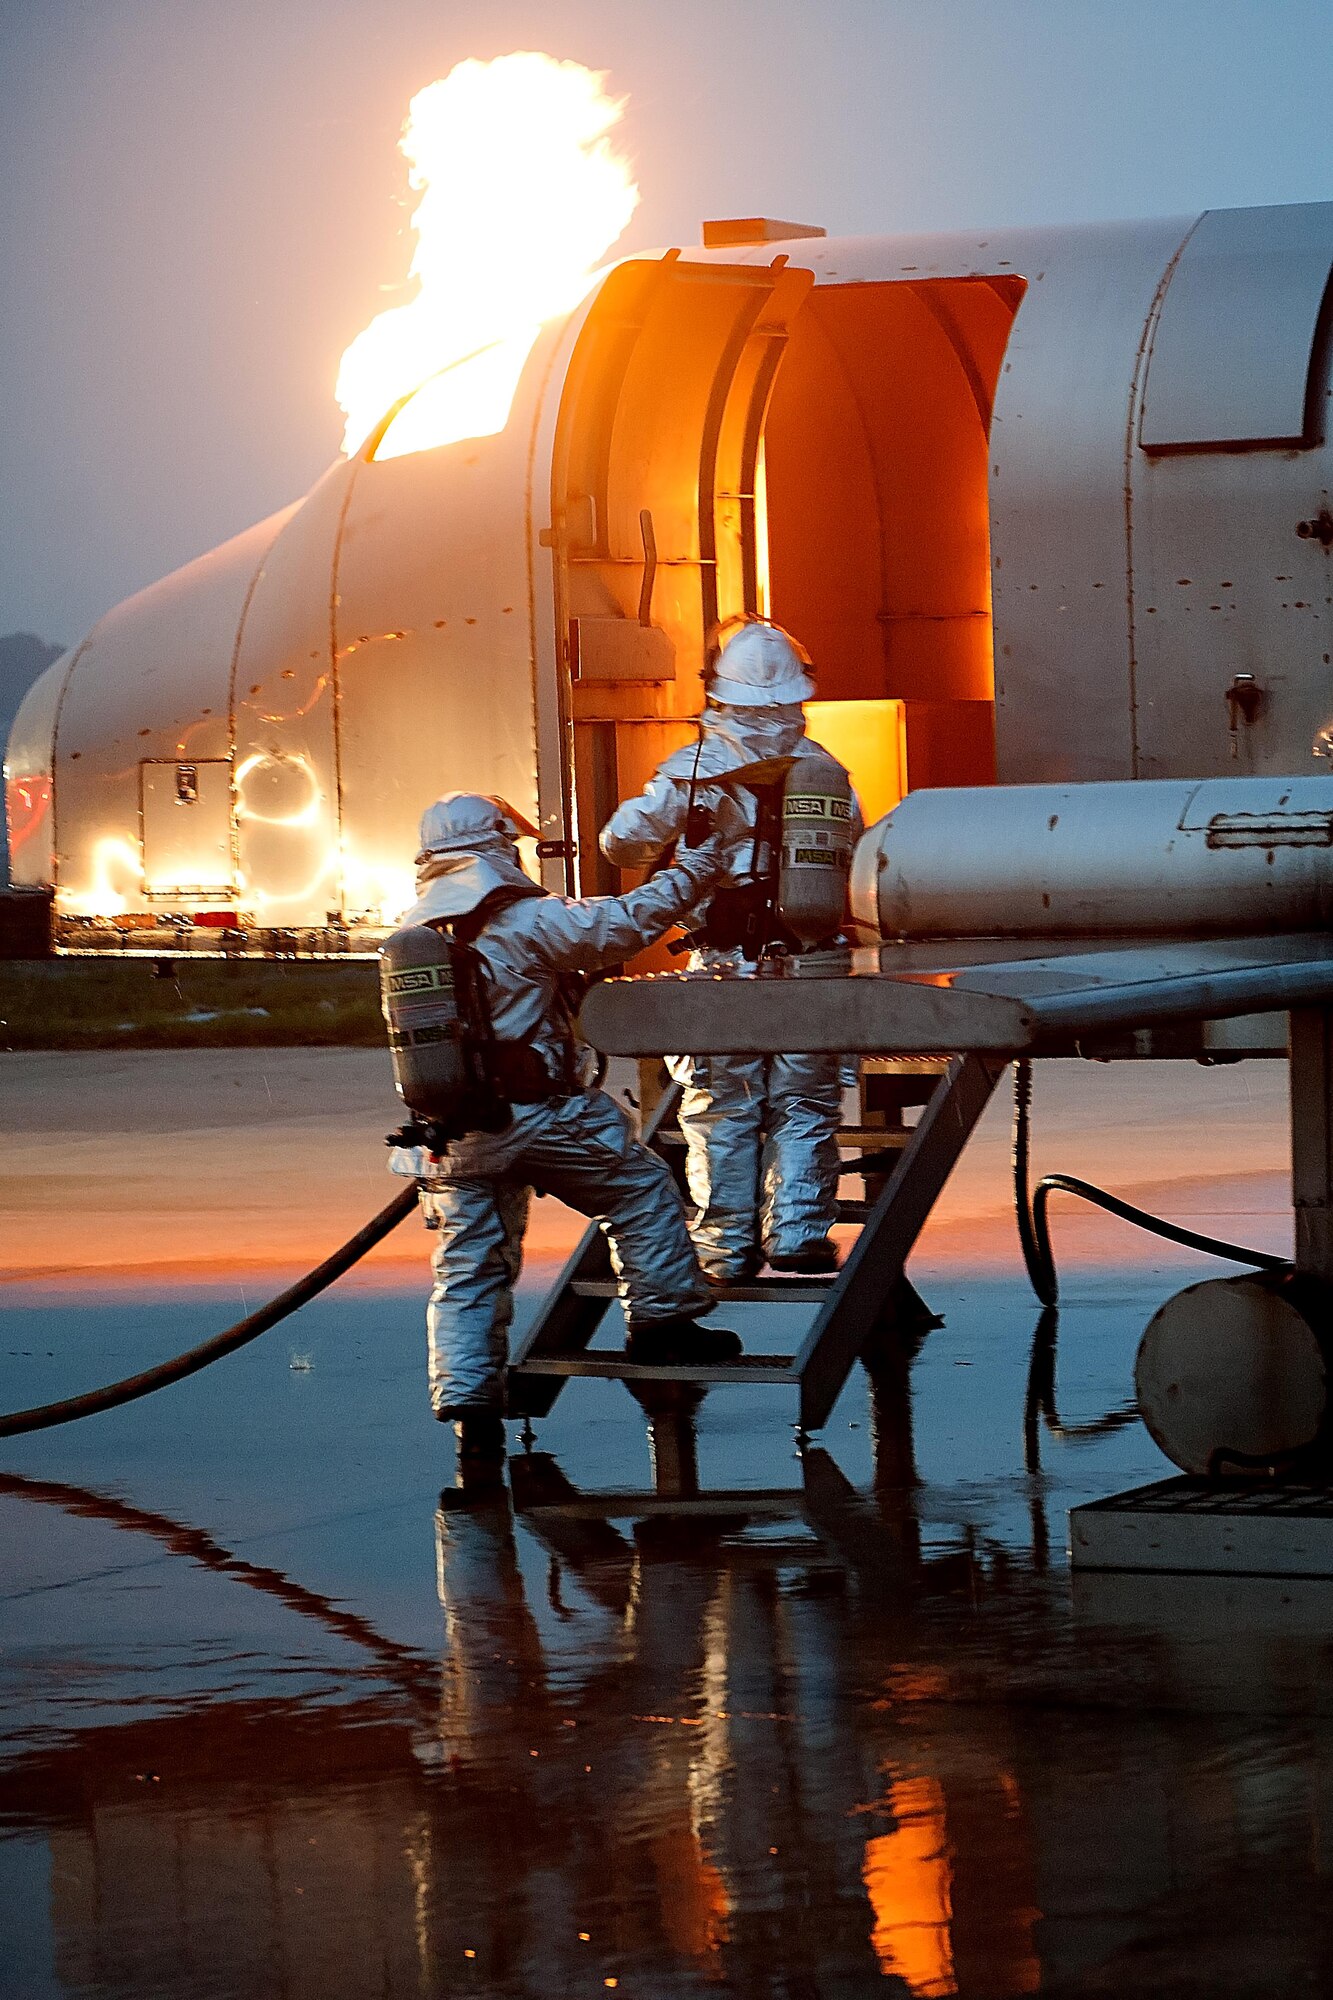 U.S. Air Force Airmen from the 8th Civil Engineer Squadron fire department extinguish a simulated aircraft fire during Exercise Beverly Midnight 15-4, July 14, 2015, at Kunsan Air Base, Republic of Korea. The simulated aircraft crash provided additional training for the fire fighters and tested emergency responder’s ability to respond to wartime scenarios. (U.S. Air Force photo by Senior Airman Divine Cox/Released)